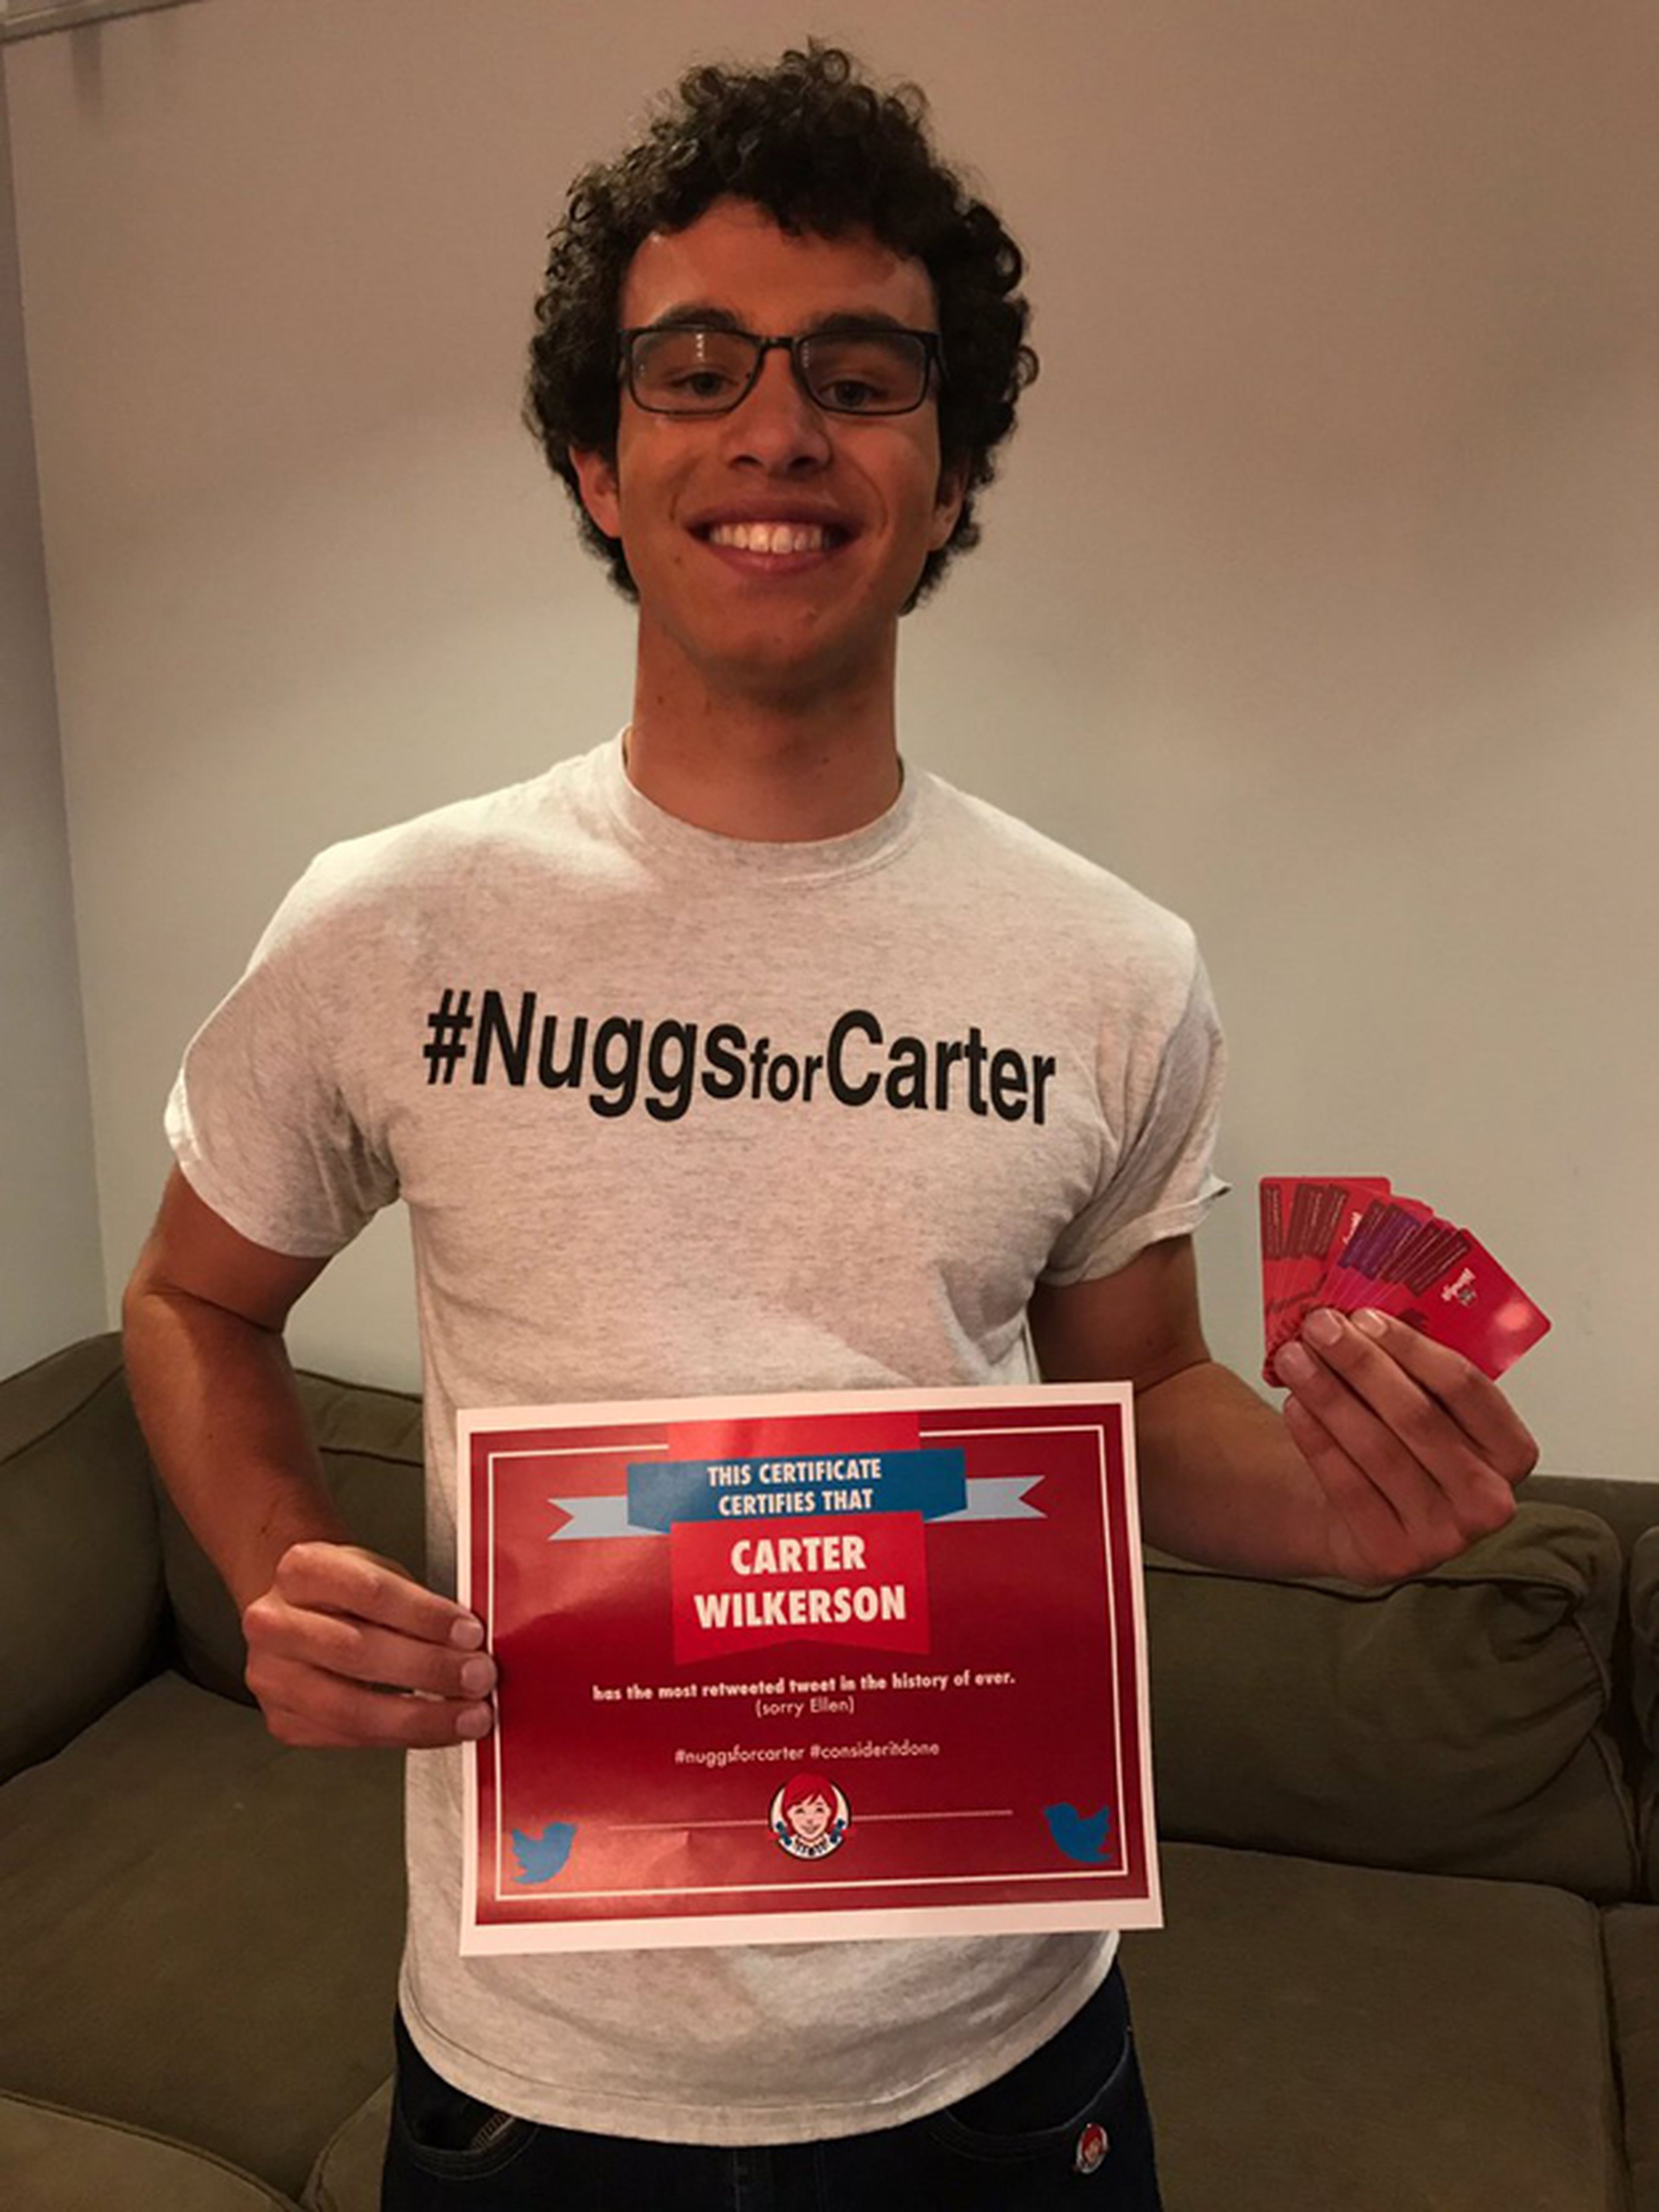 Nuggs for Carter